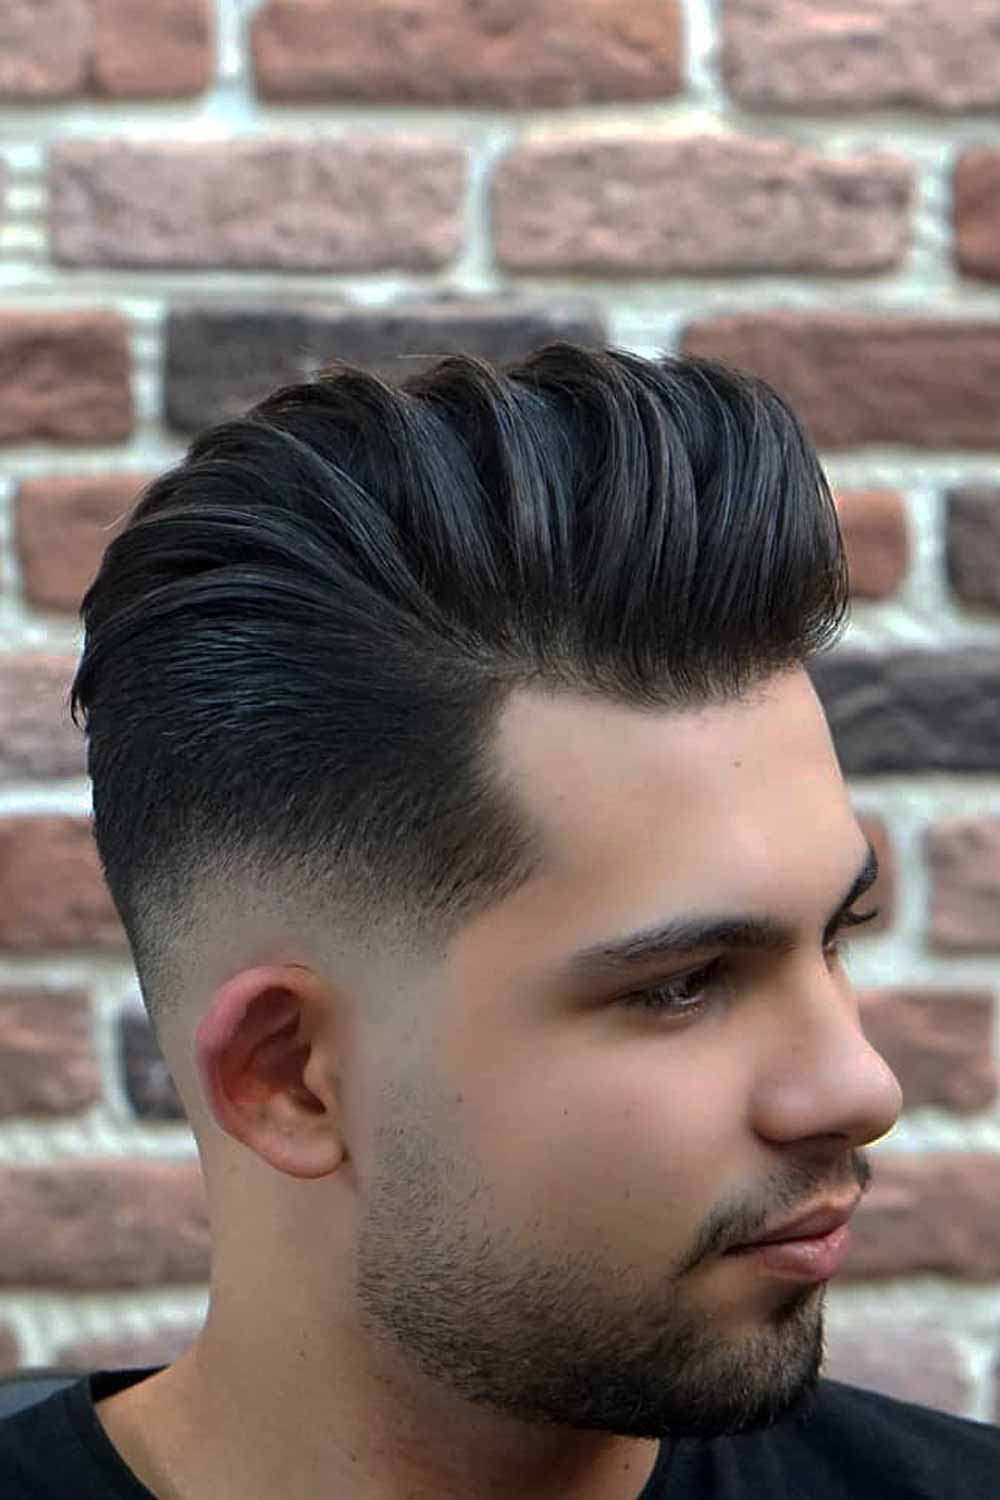 Long Hair vs Short Hair: Discover the Best Hairstyle for Men